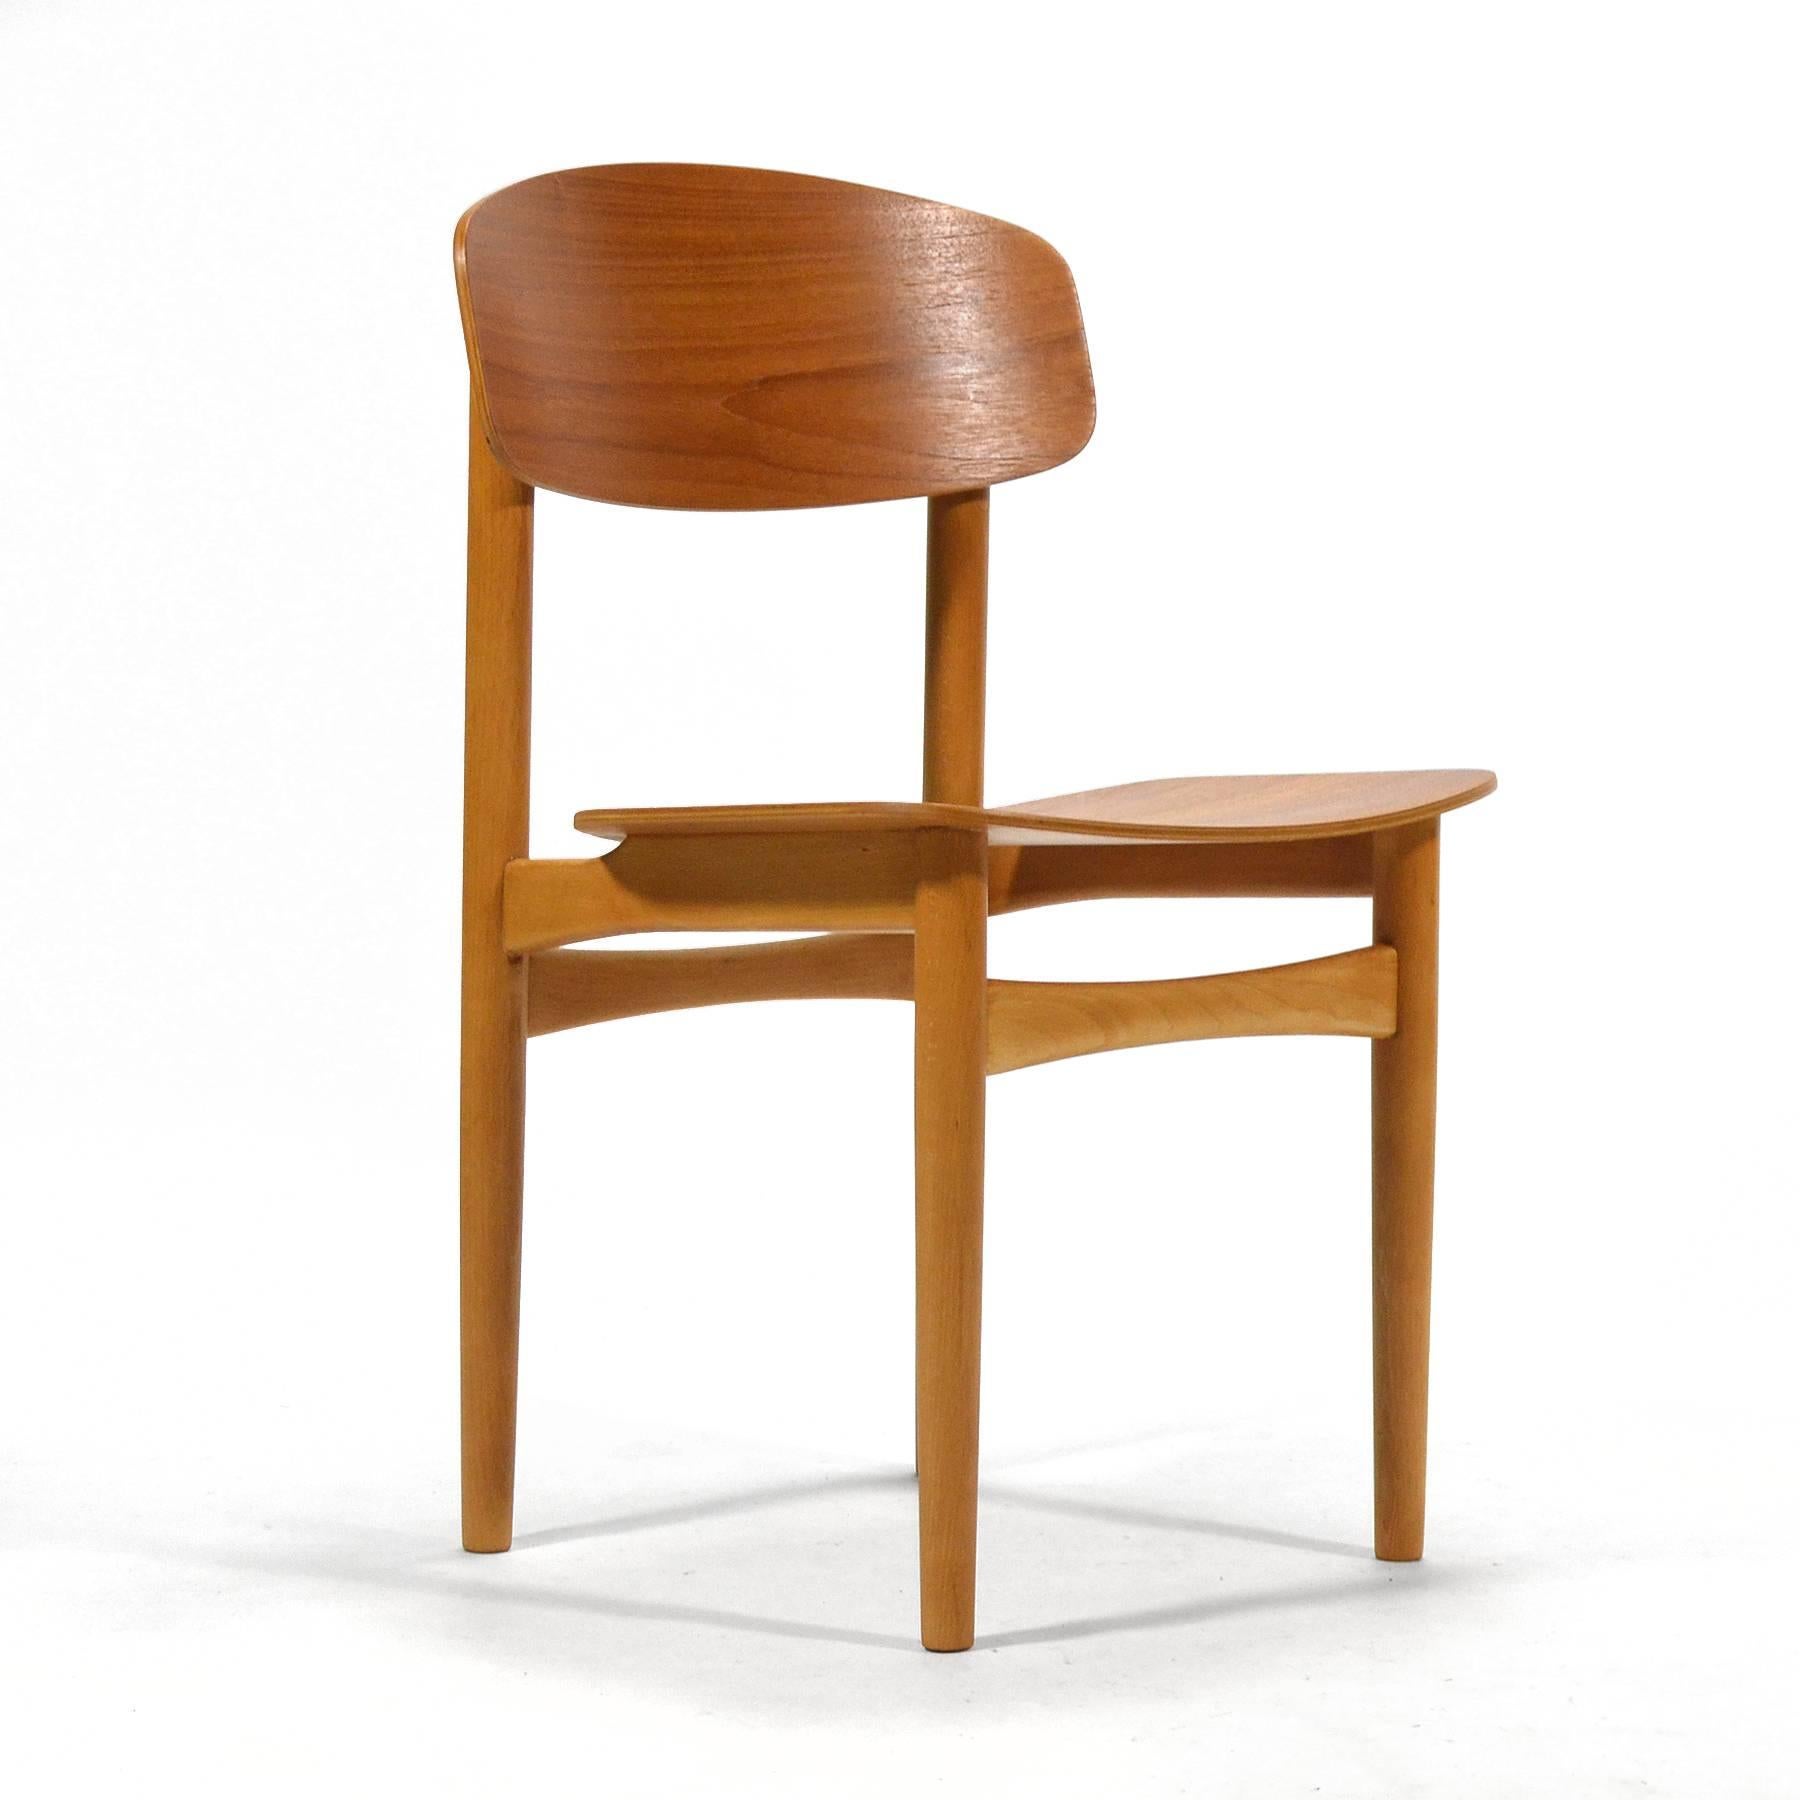 These  beautiful side chairs by Børge Mogensen for Søborg show the global influence of Charles and Ray Eames' molded plywood designs. Mogensen combines a teak seat and back with a birch frame that exhibits his love of Shaker simplicity. With expert